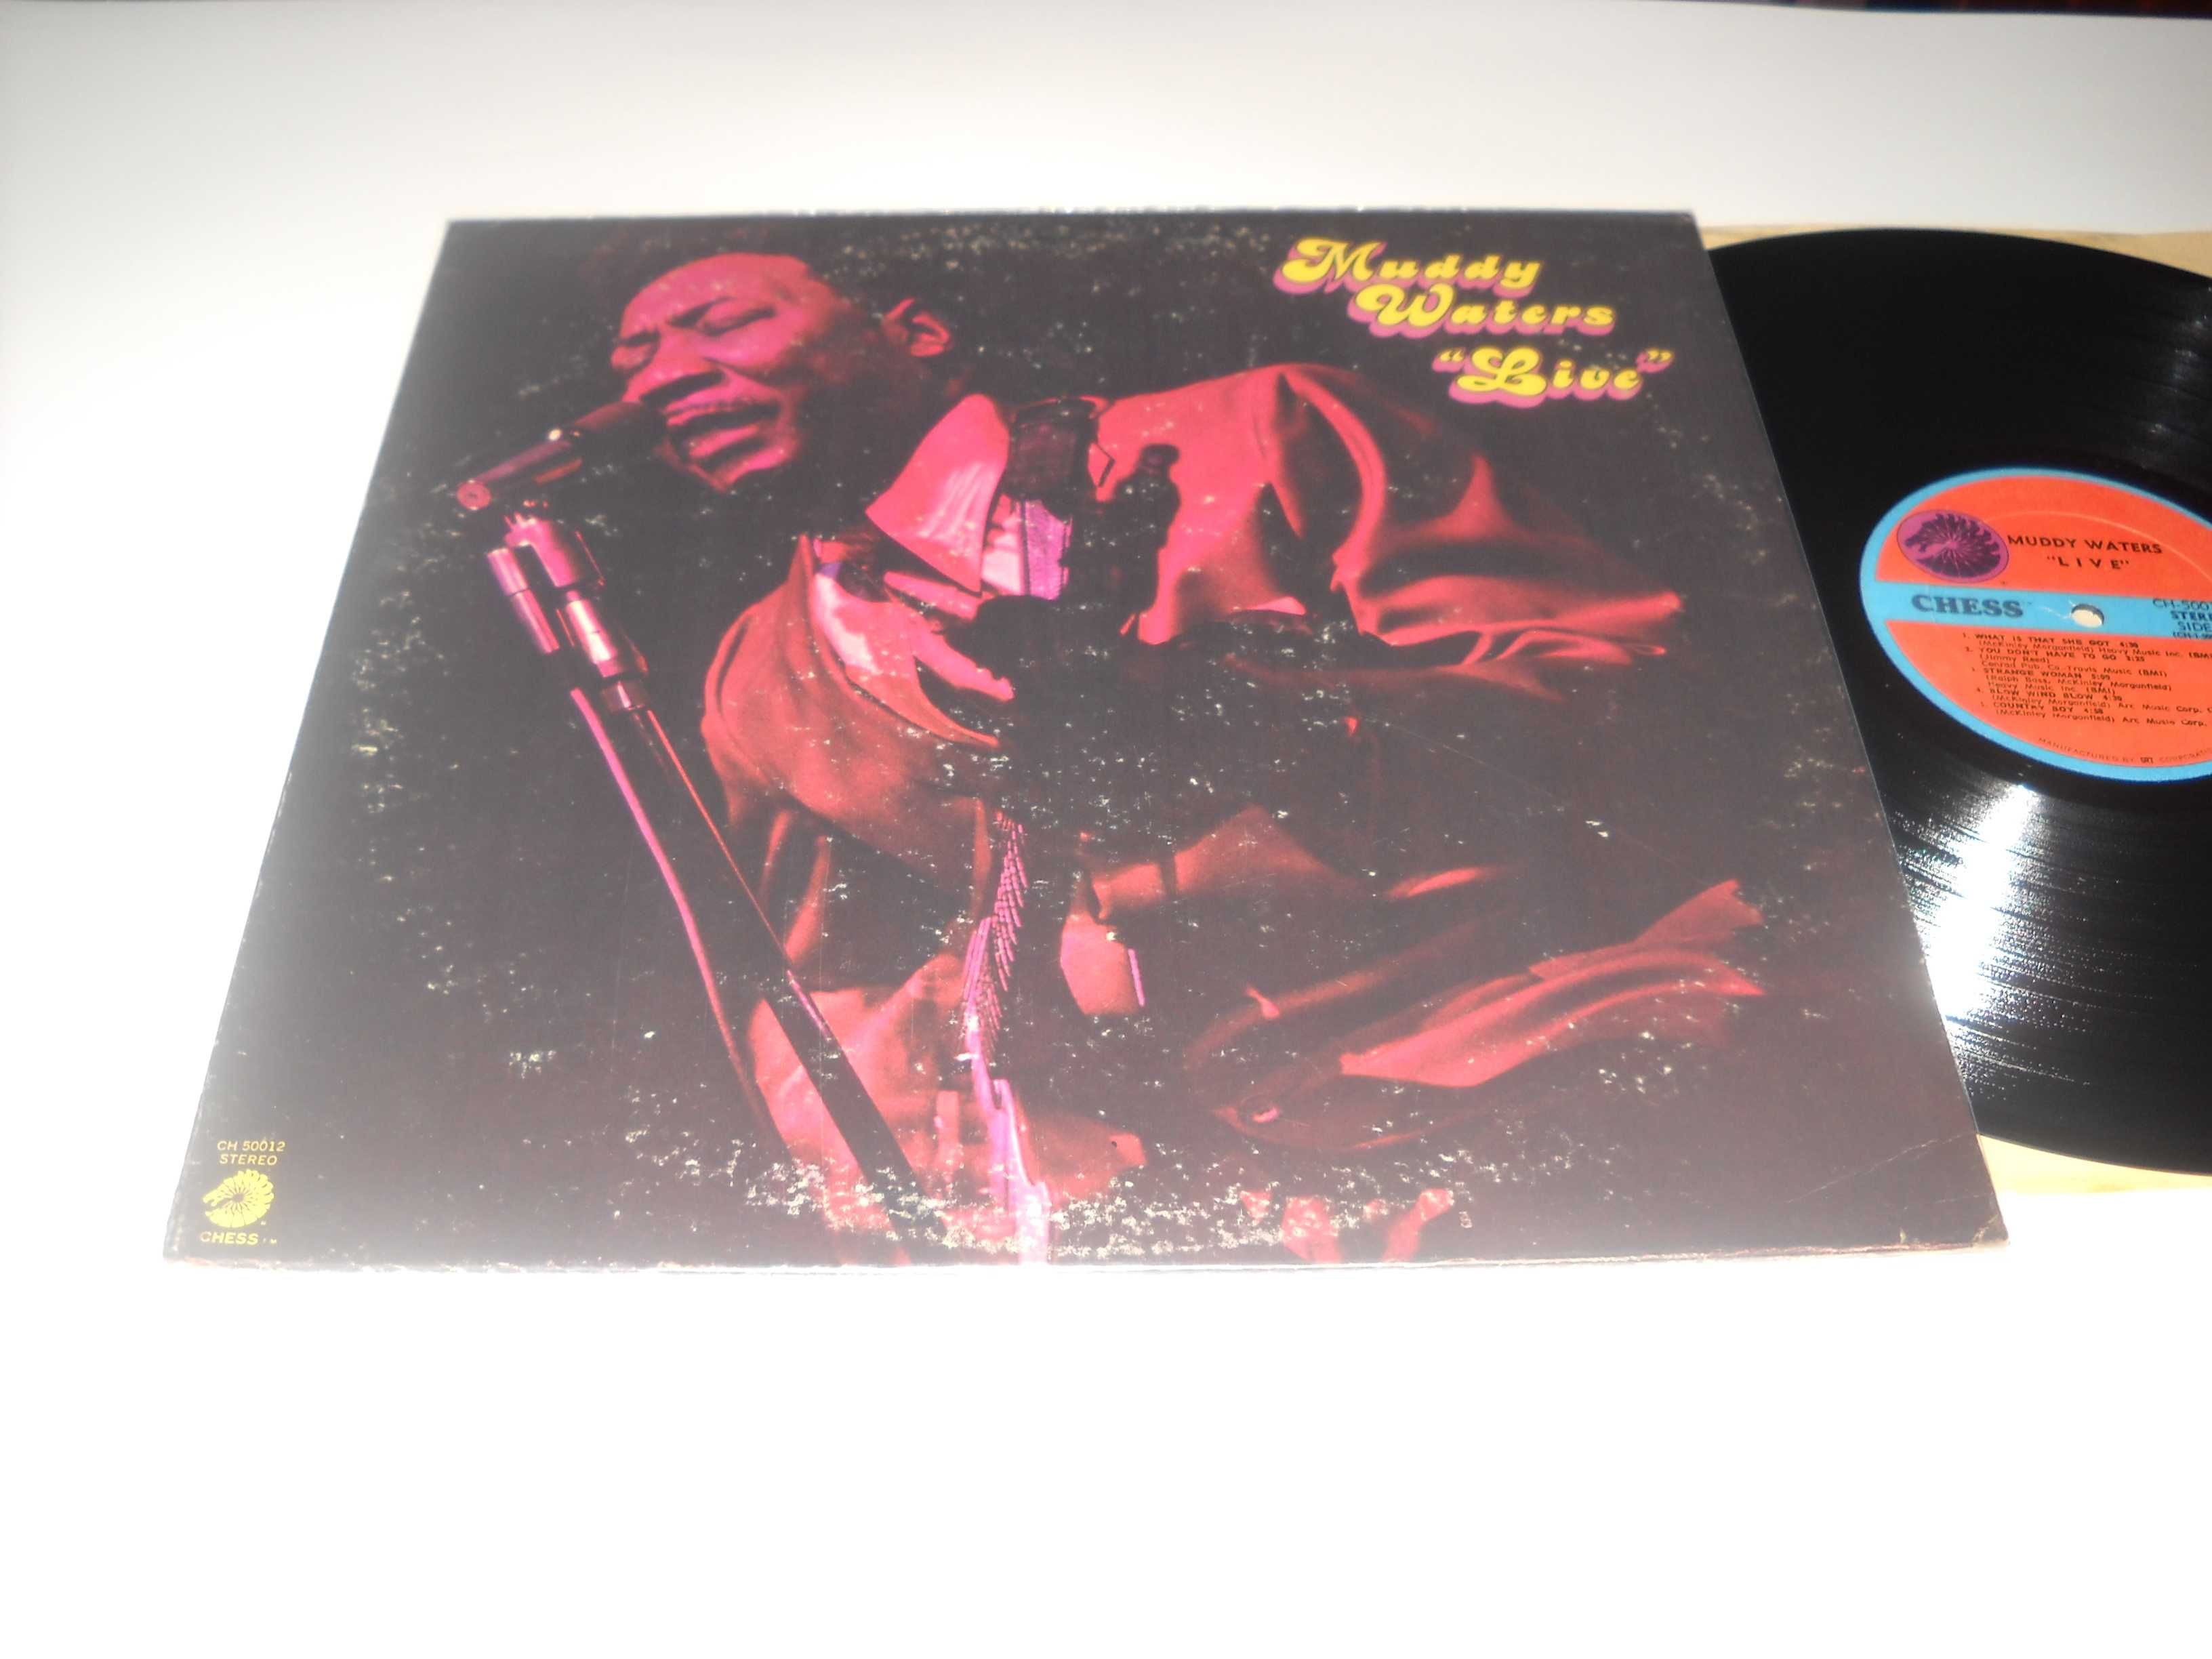 Muddy Waters: "Live" (At Mr. Kelly's)(1971, reed. 1977) vinil, USA, NM